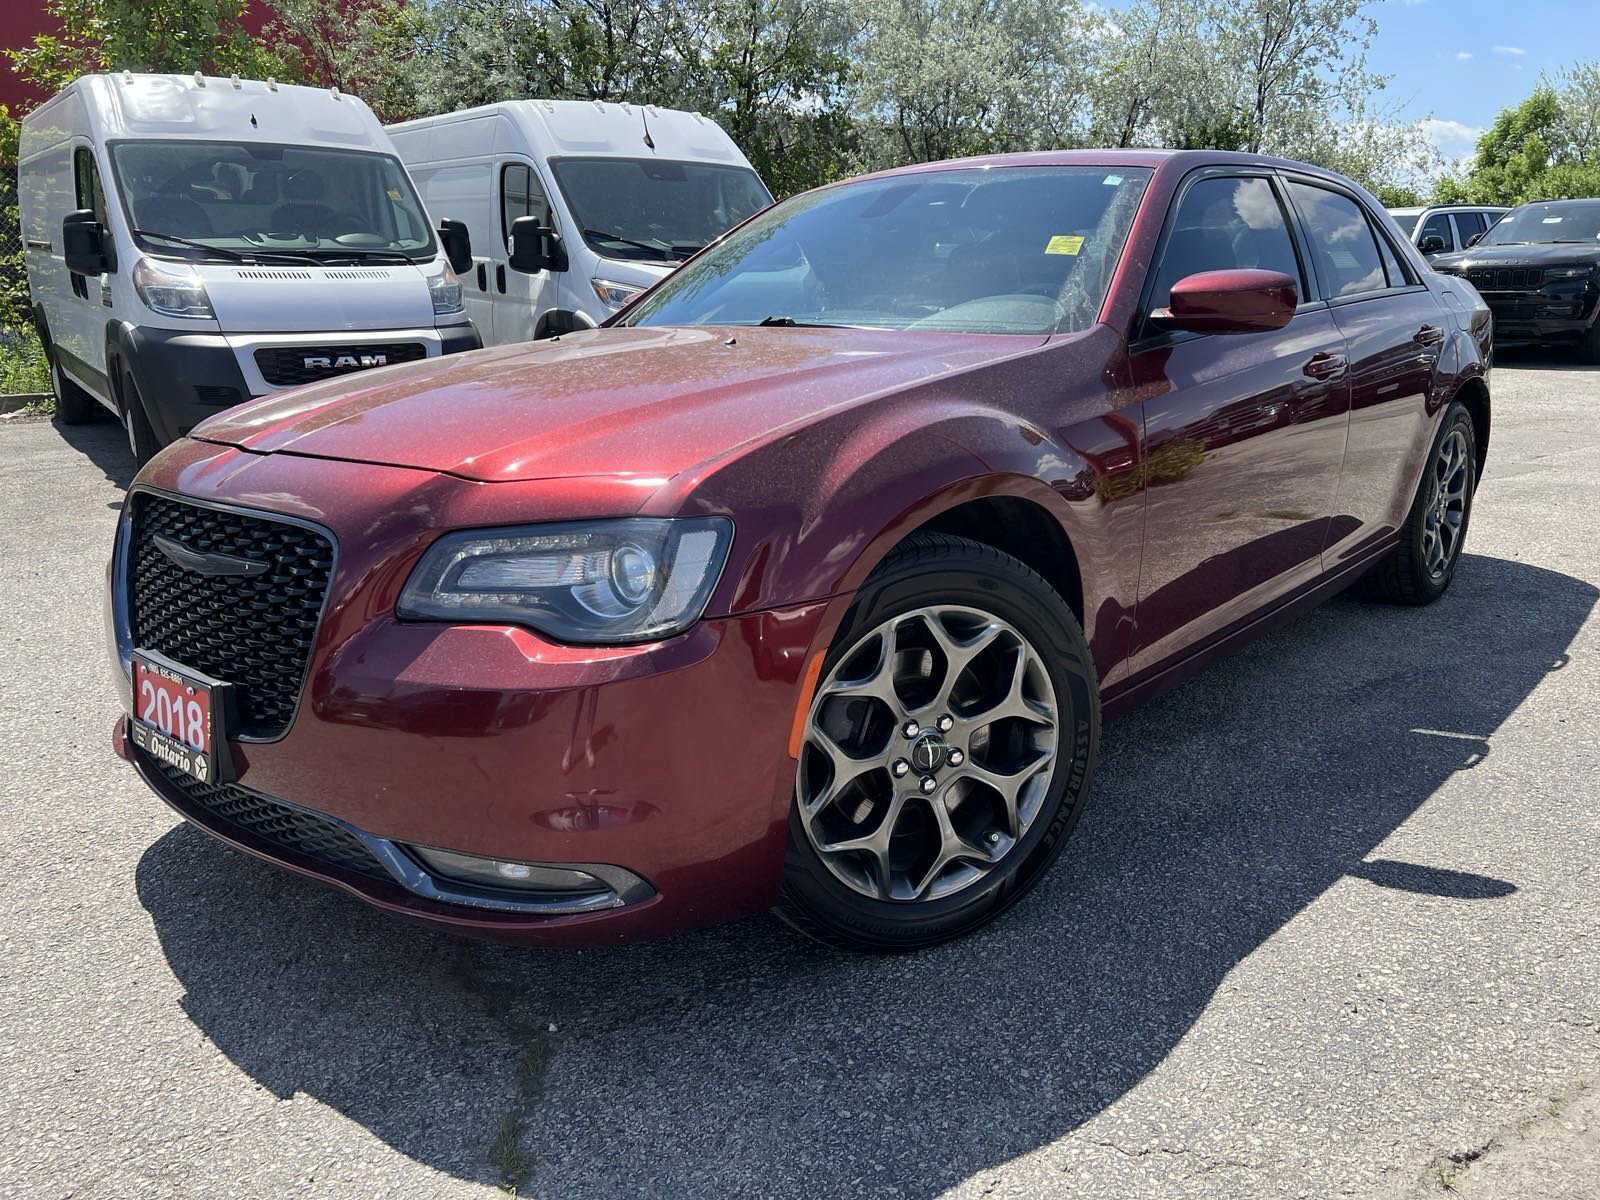 2018 Chrysler 300 300S**AWD**LEATHER**PANORAMIC SUNROOF**8.4 SCREEN*